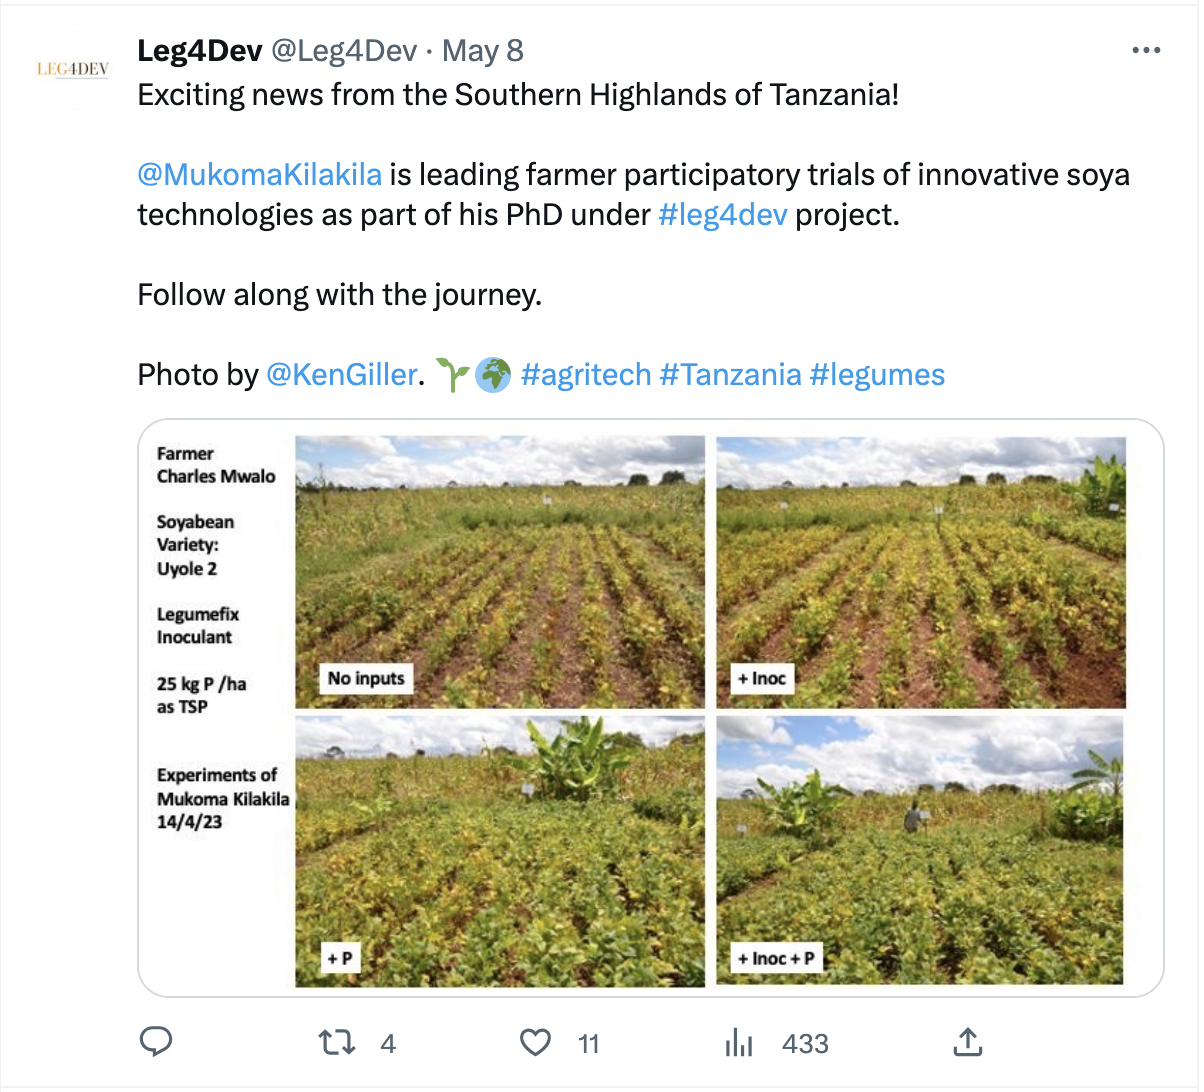 LEG4DEV project researchers are identifying exciting legume research and disseminating to stakeholders via the LEG4DEV Twitter feed